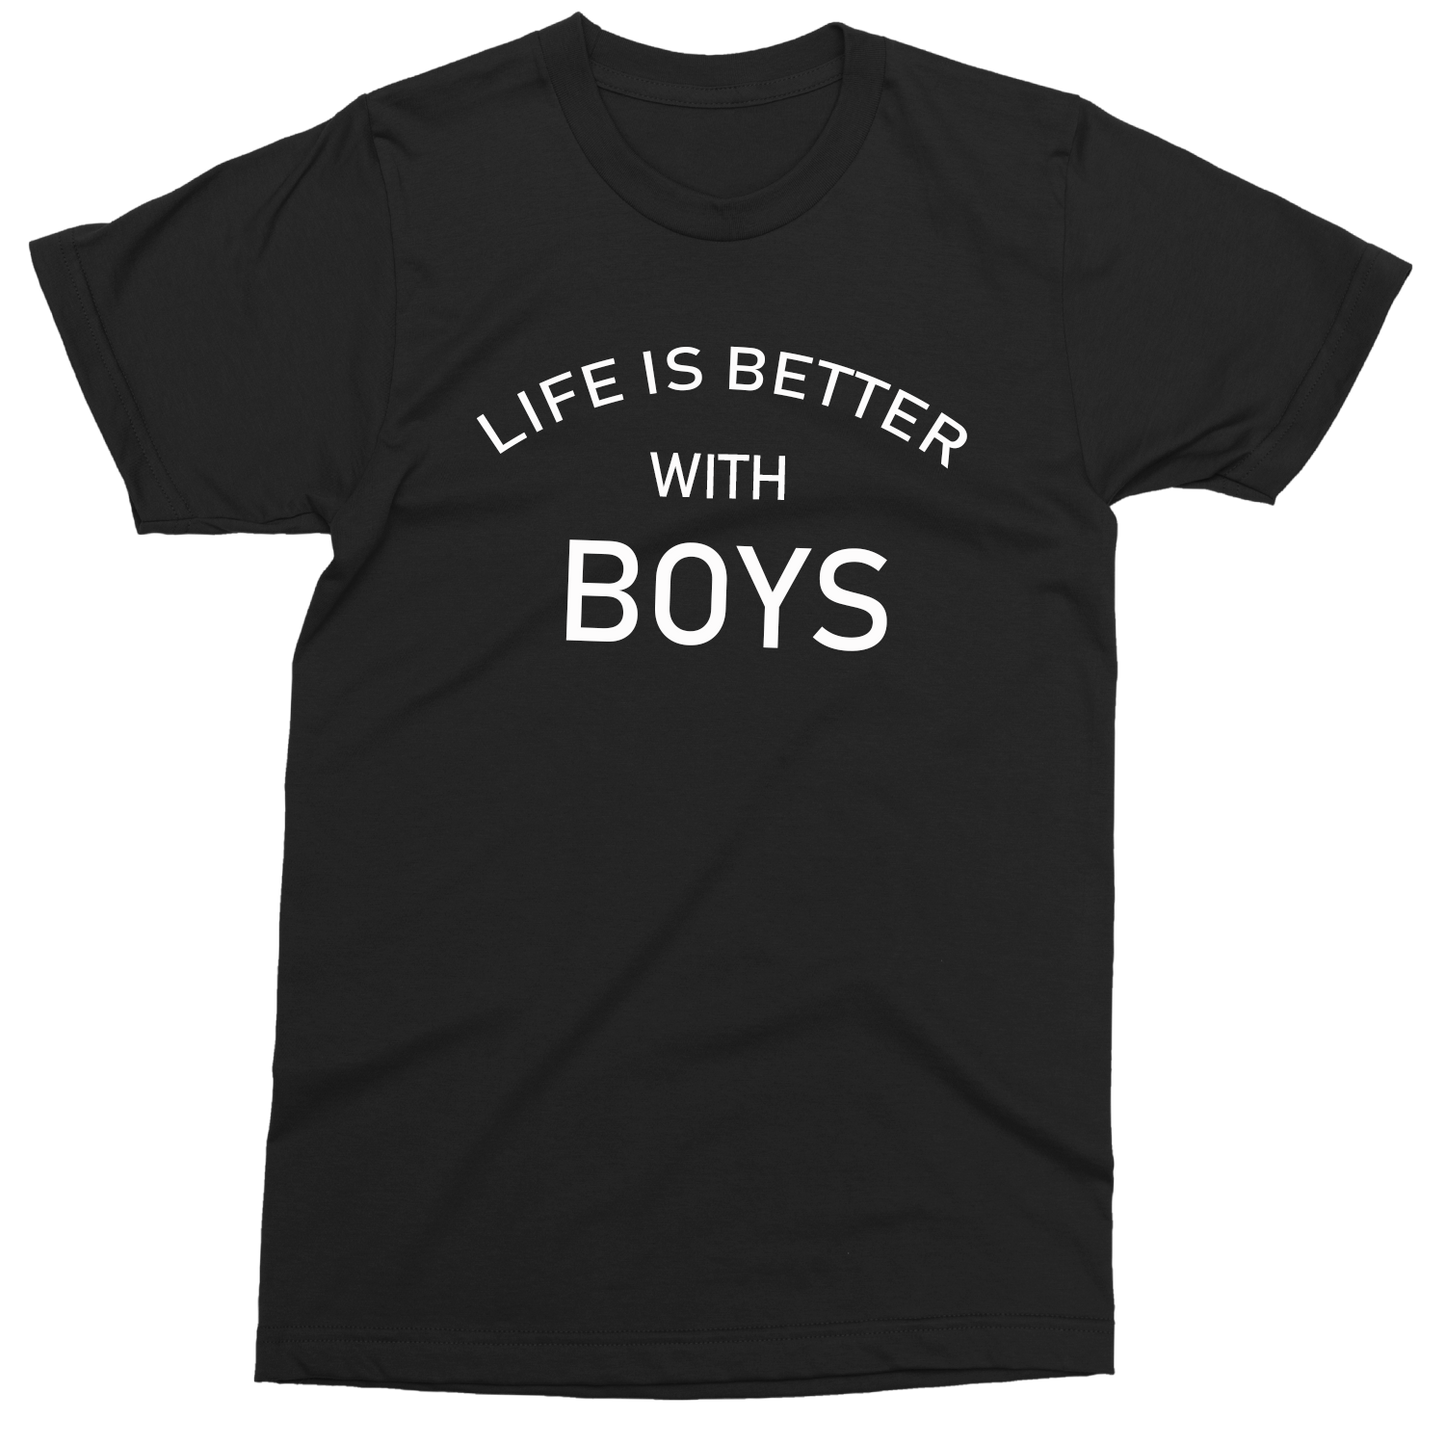 Life is better with boys - adult black t-shirt